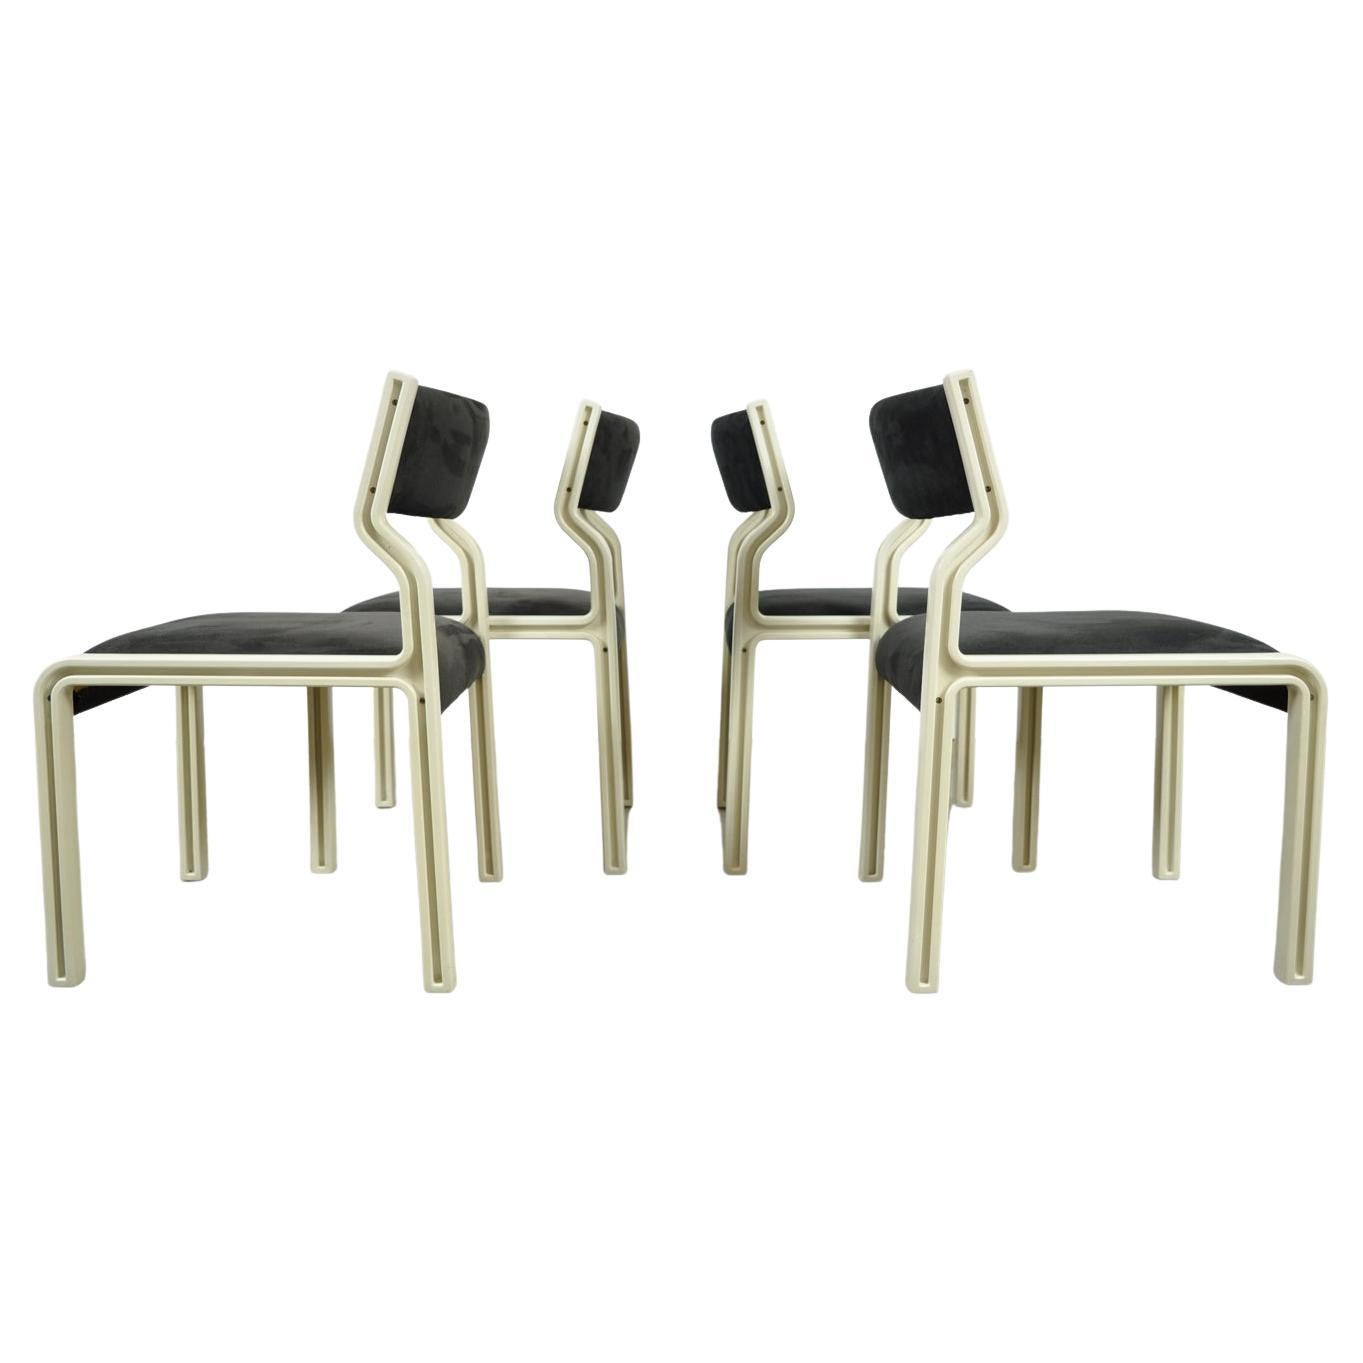 Set of 4 experimental dining chairs by Pierre Mennen for Pastoe, 1972 Netherland For Sale